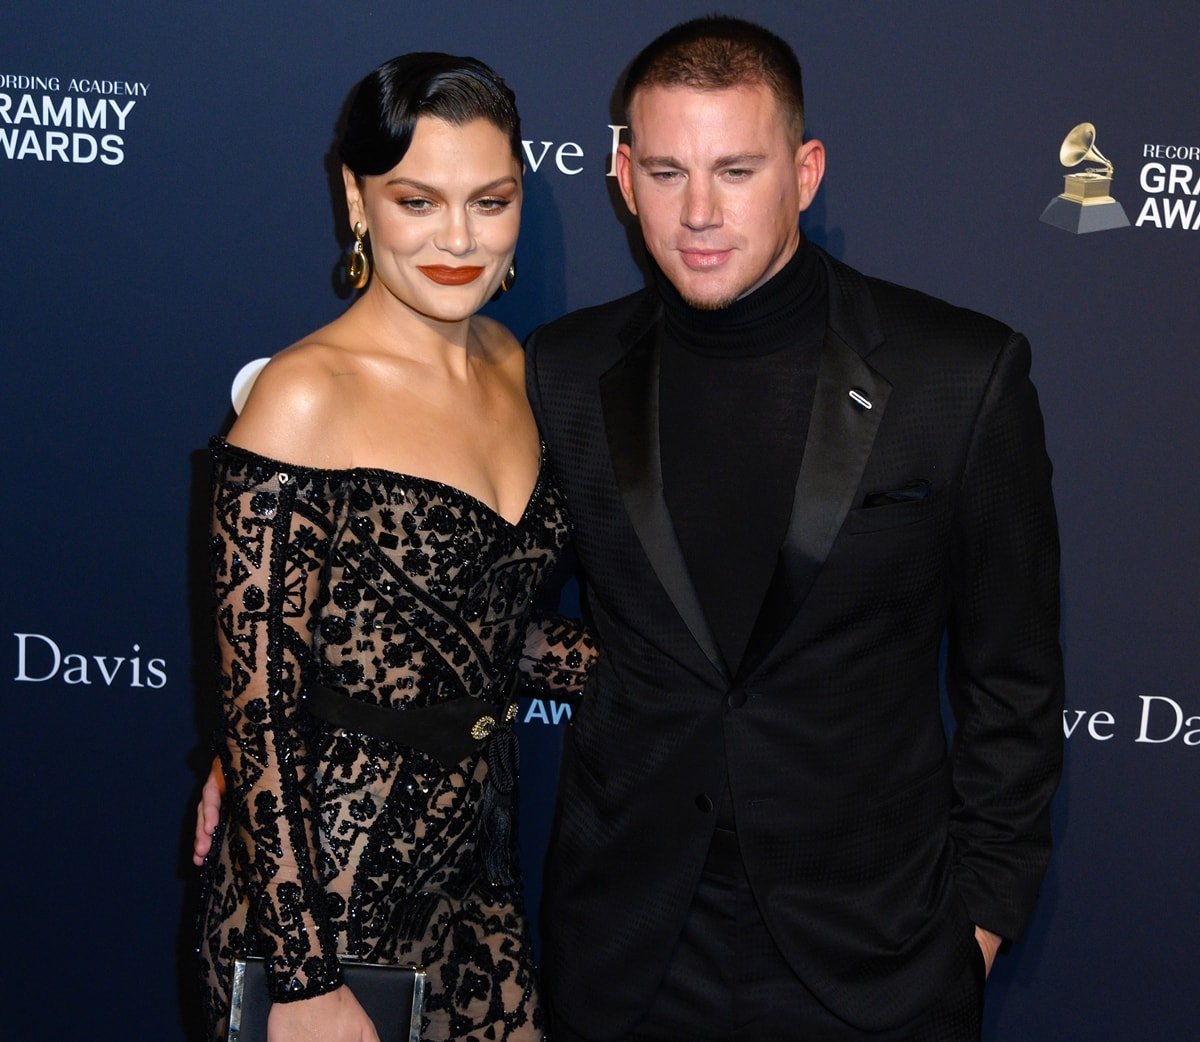 Channing Tatum and Jessie J dated on and off from 2018 to 2020